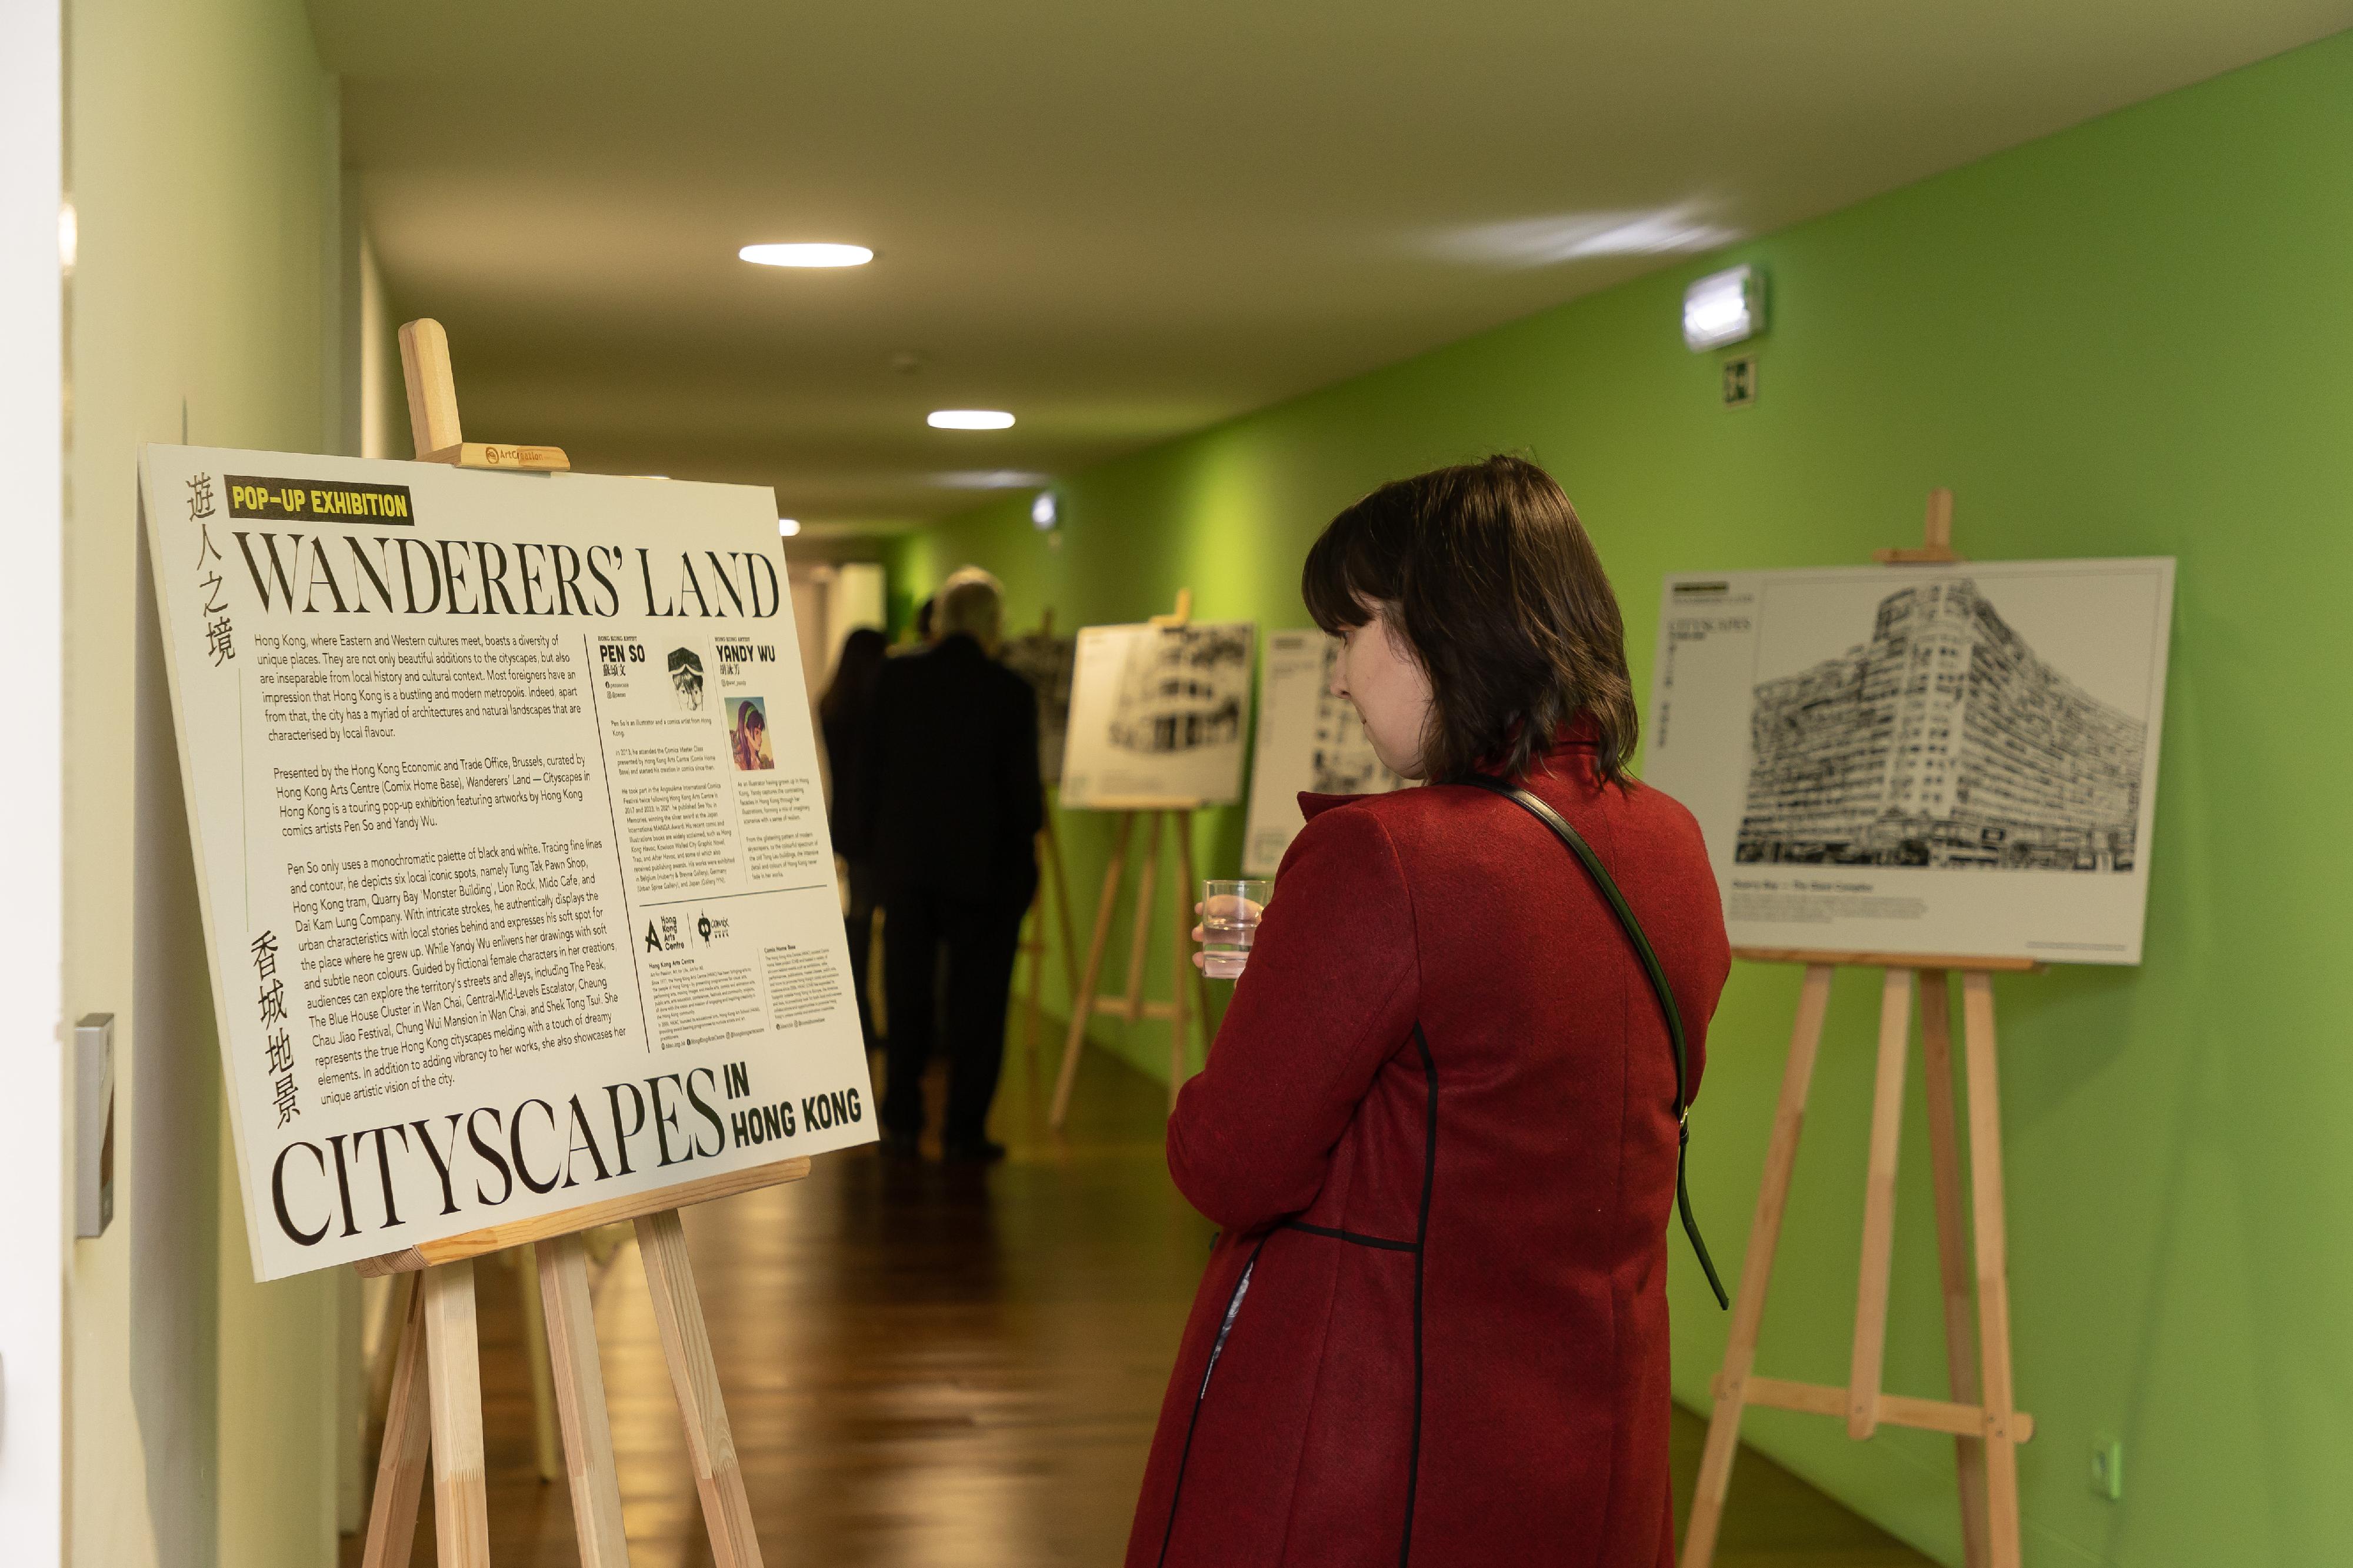 The Hong Kong Economic and Trade Office, Brussels hosted a Chinese New Year reception in Lisbon, Portugal, on February 22. The exhibition Wanderers' Land - Cityscapes in Hong Kong with drawings of Hong Kong comics artists Pen So and Yandy Wu was held at the reception.